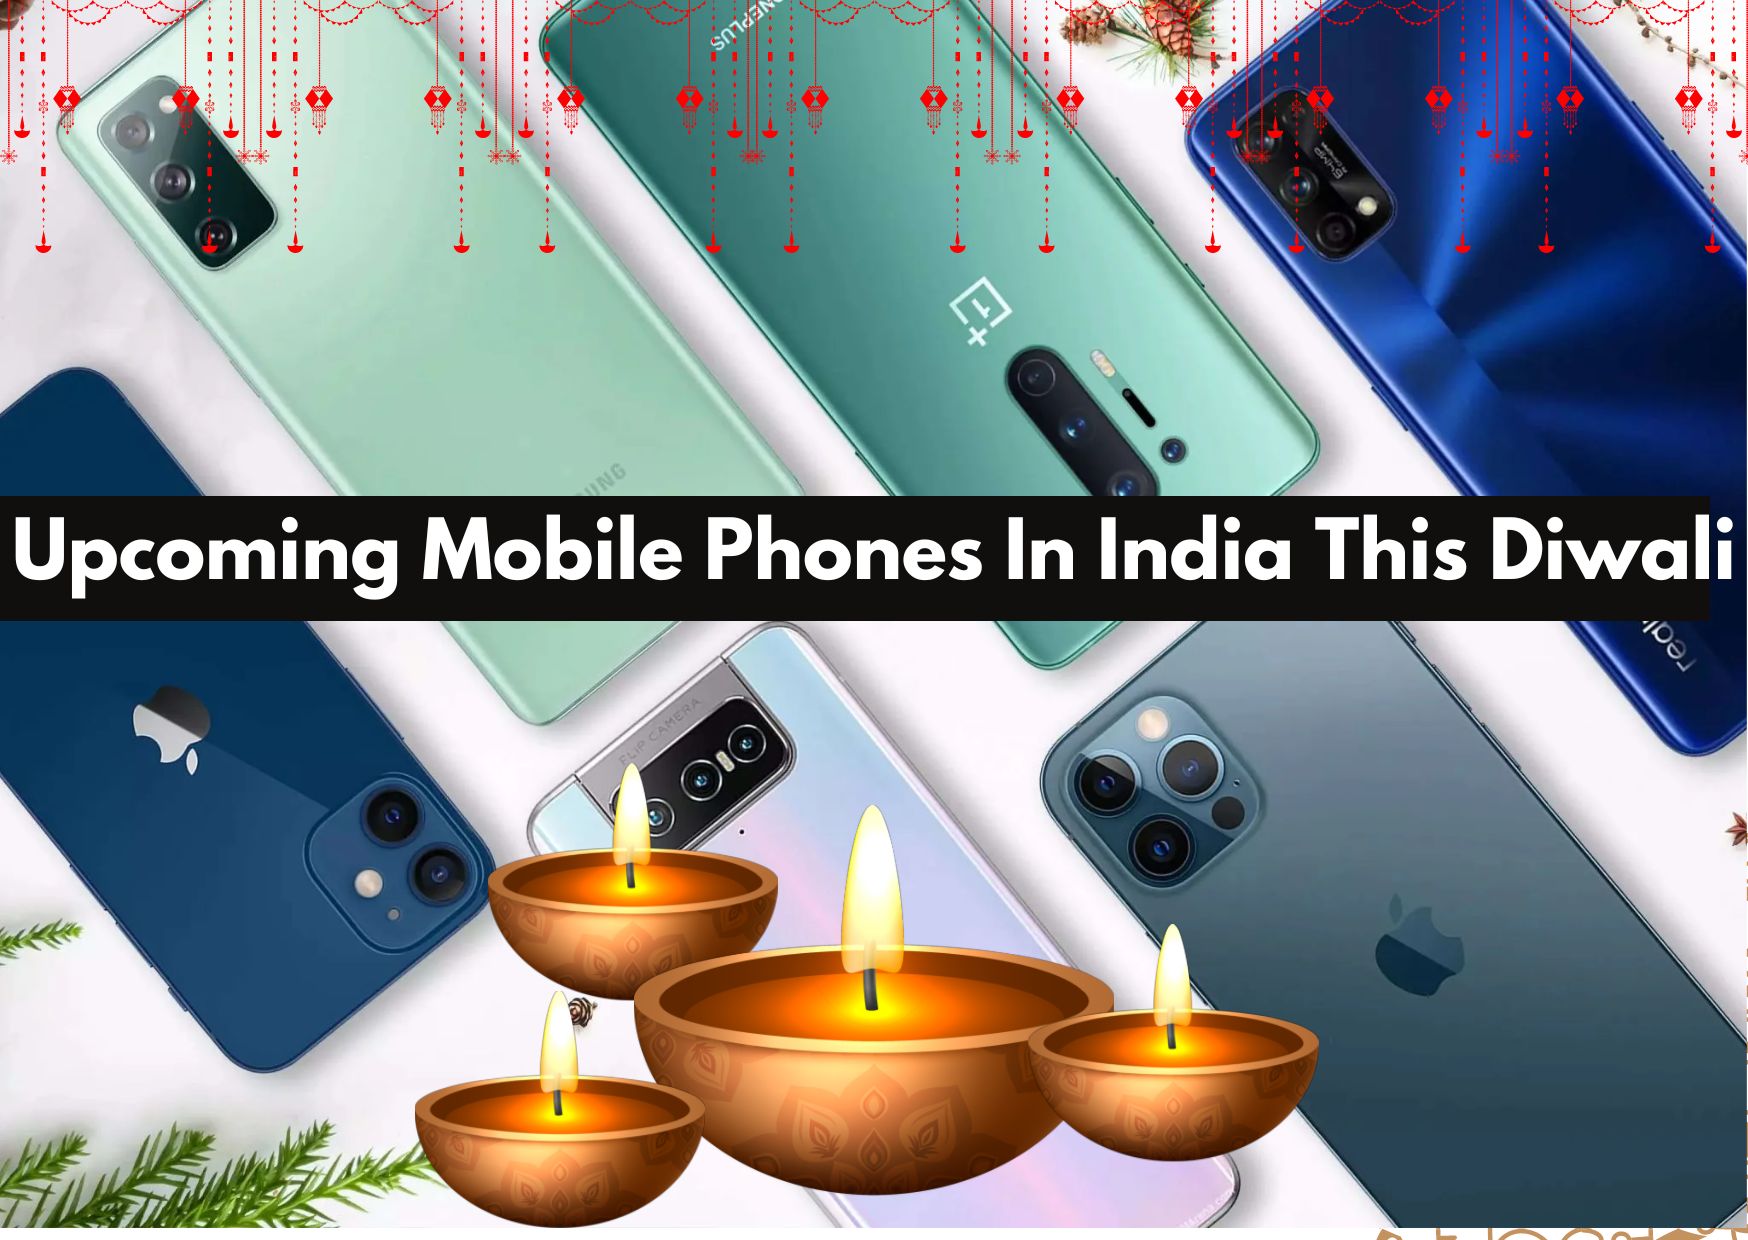  Upcoming Mobile Phones in India This Diwali - Special Launch Offers